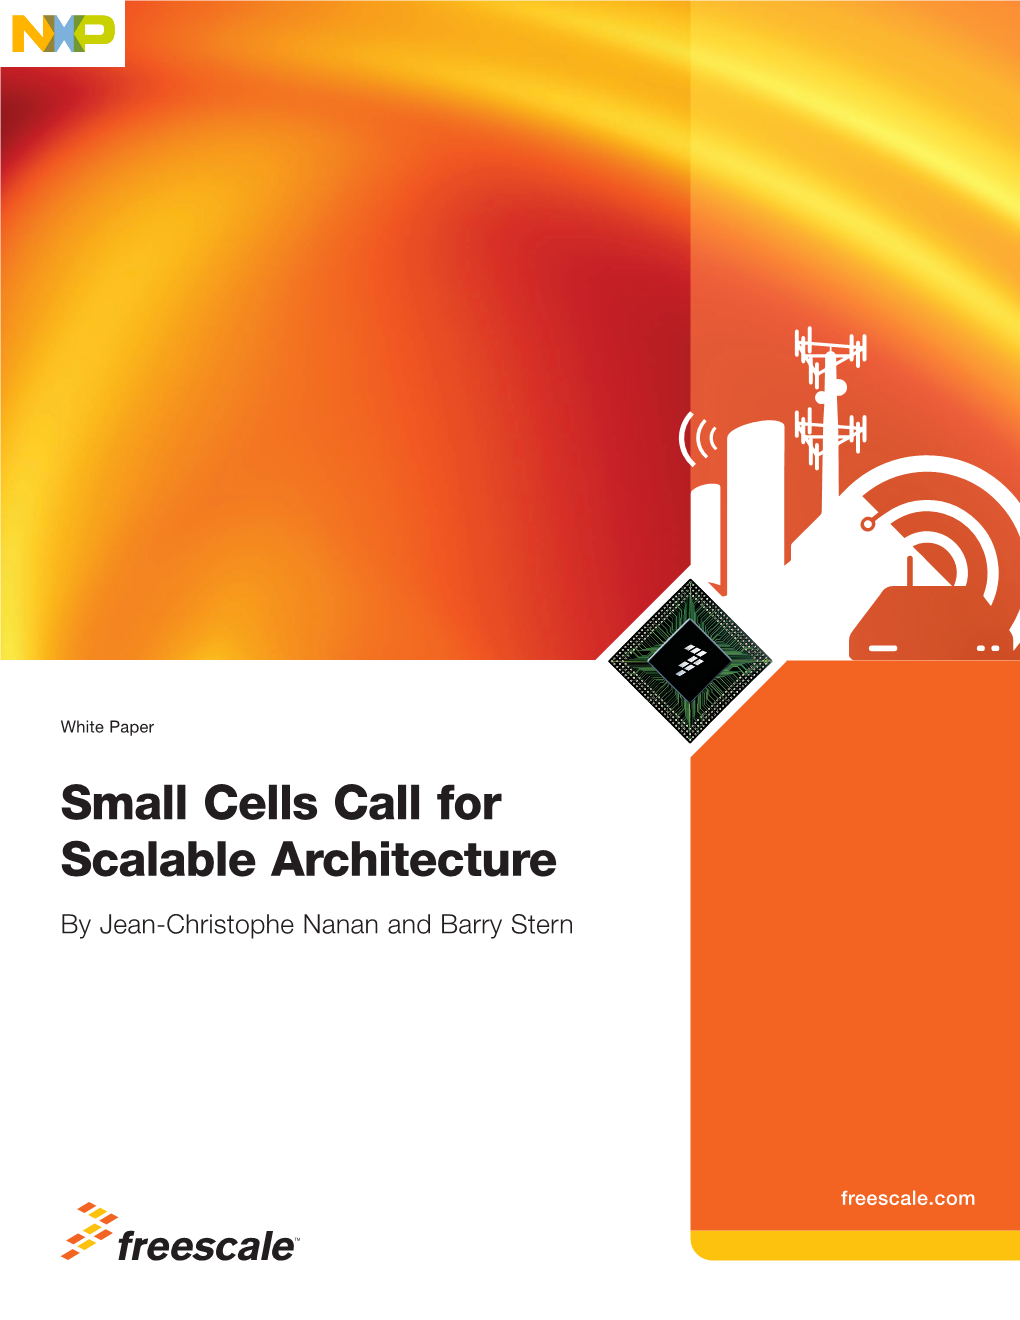 Small Cells Call for Scalable Architecture by Jean-Christophe Nanan and Barry Stern